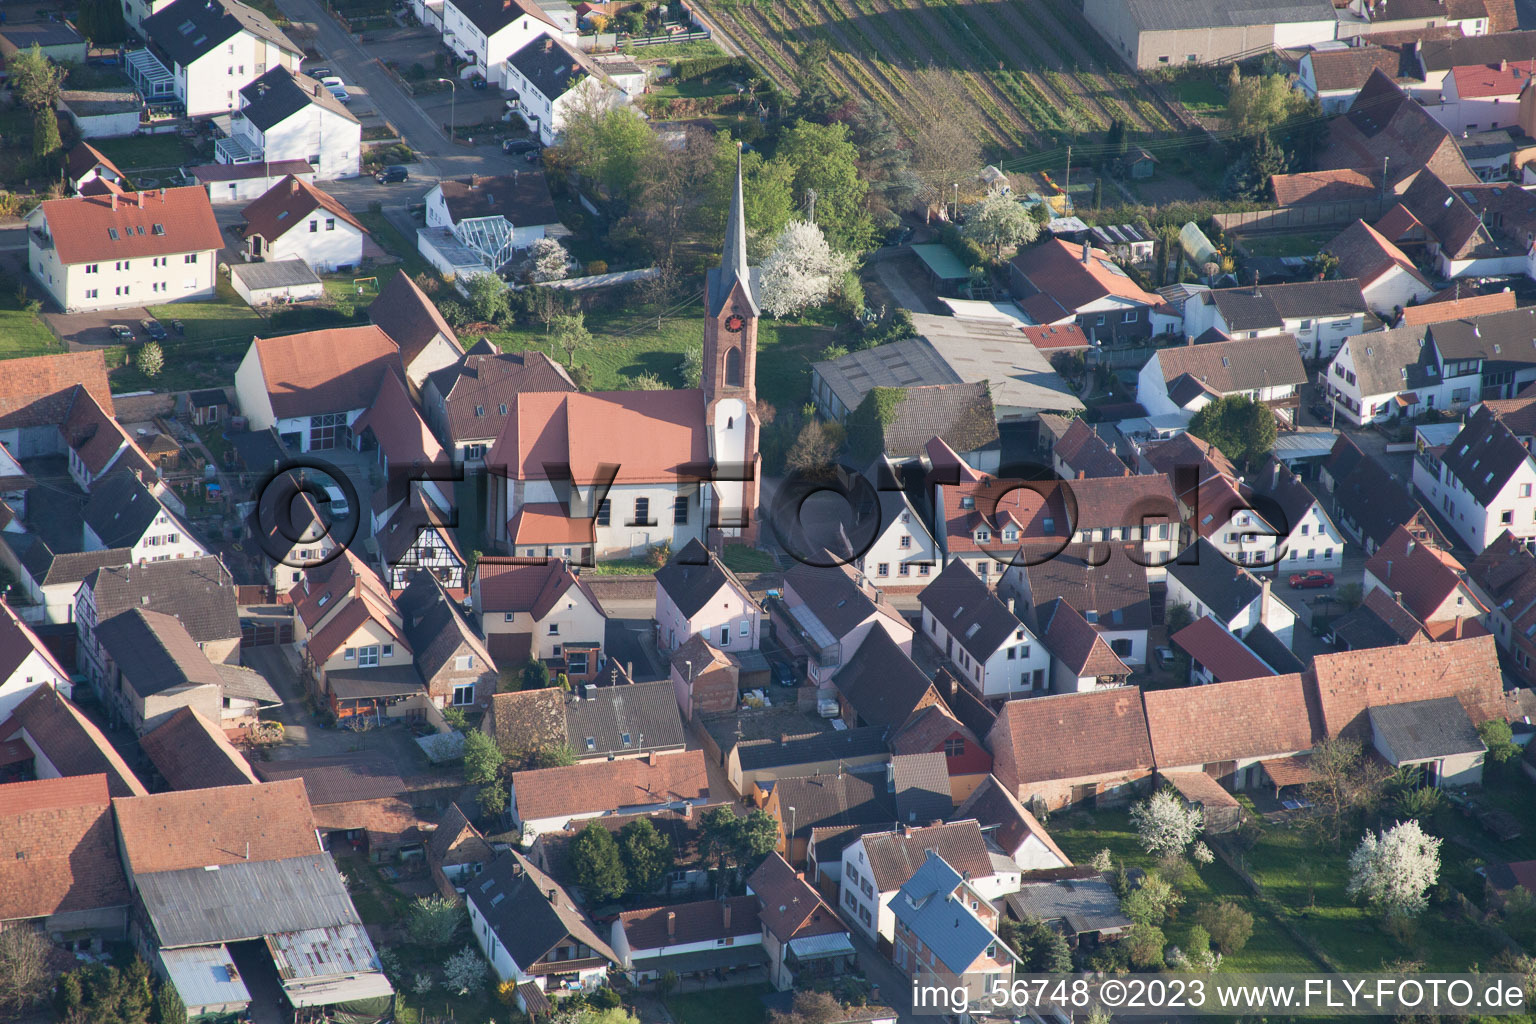 Hochstadt in the state Rhineland-Palatinate, Germany seen from above